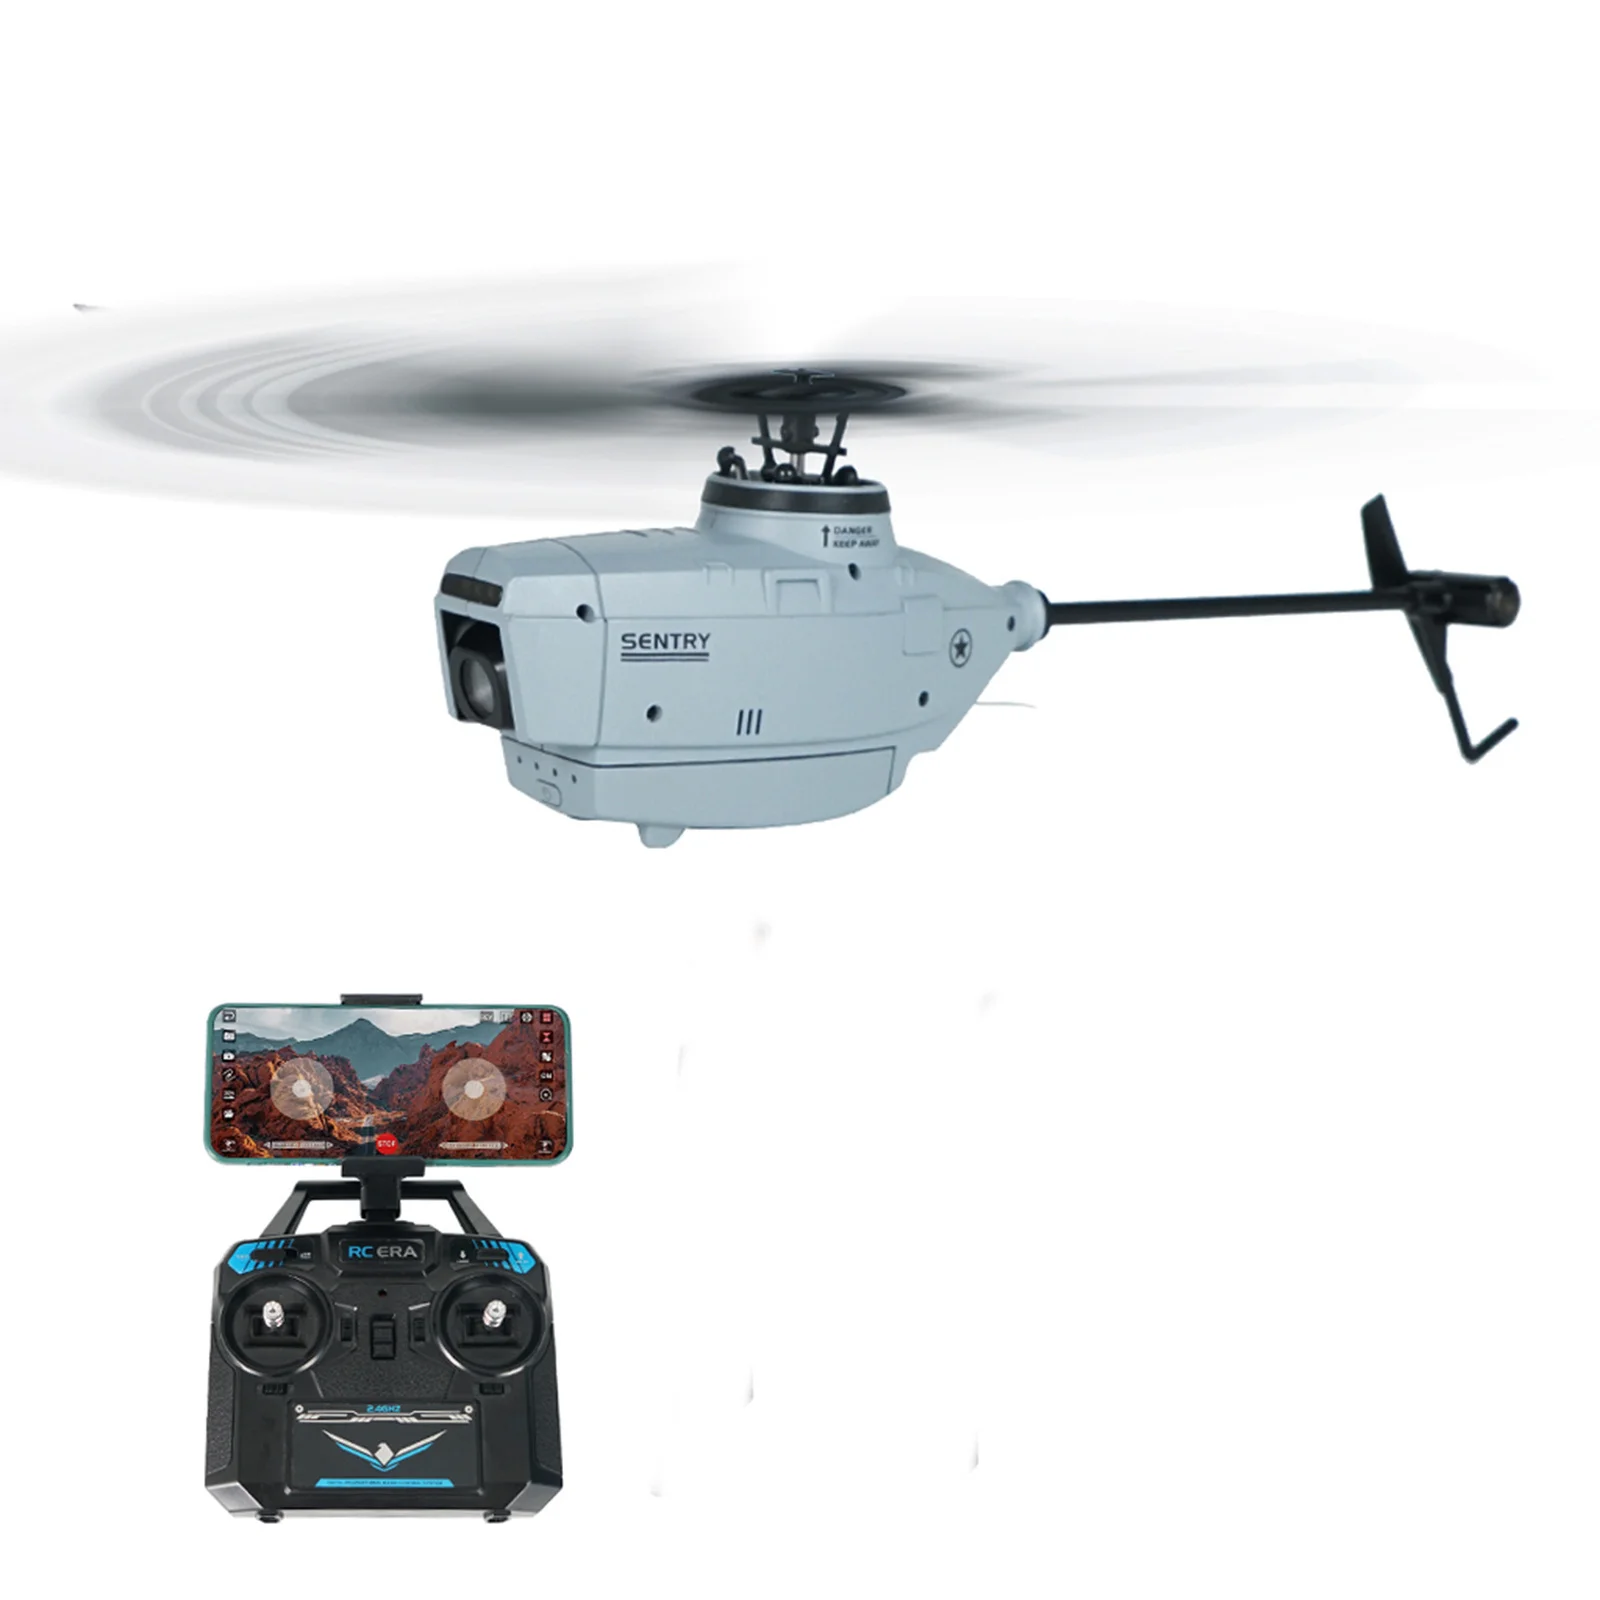 

RC ERA C127 Sentry 4CH 6-Axis Gyro Flybarless Optical Flow Localization RC Helicopter With 720P Camera 2.4GHz